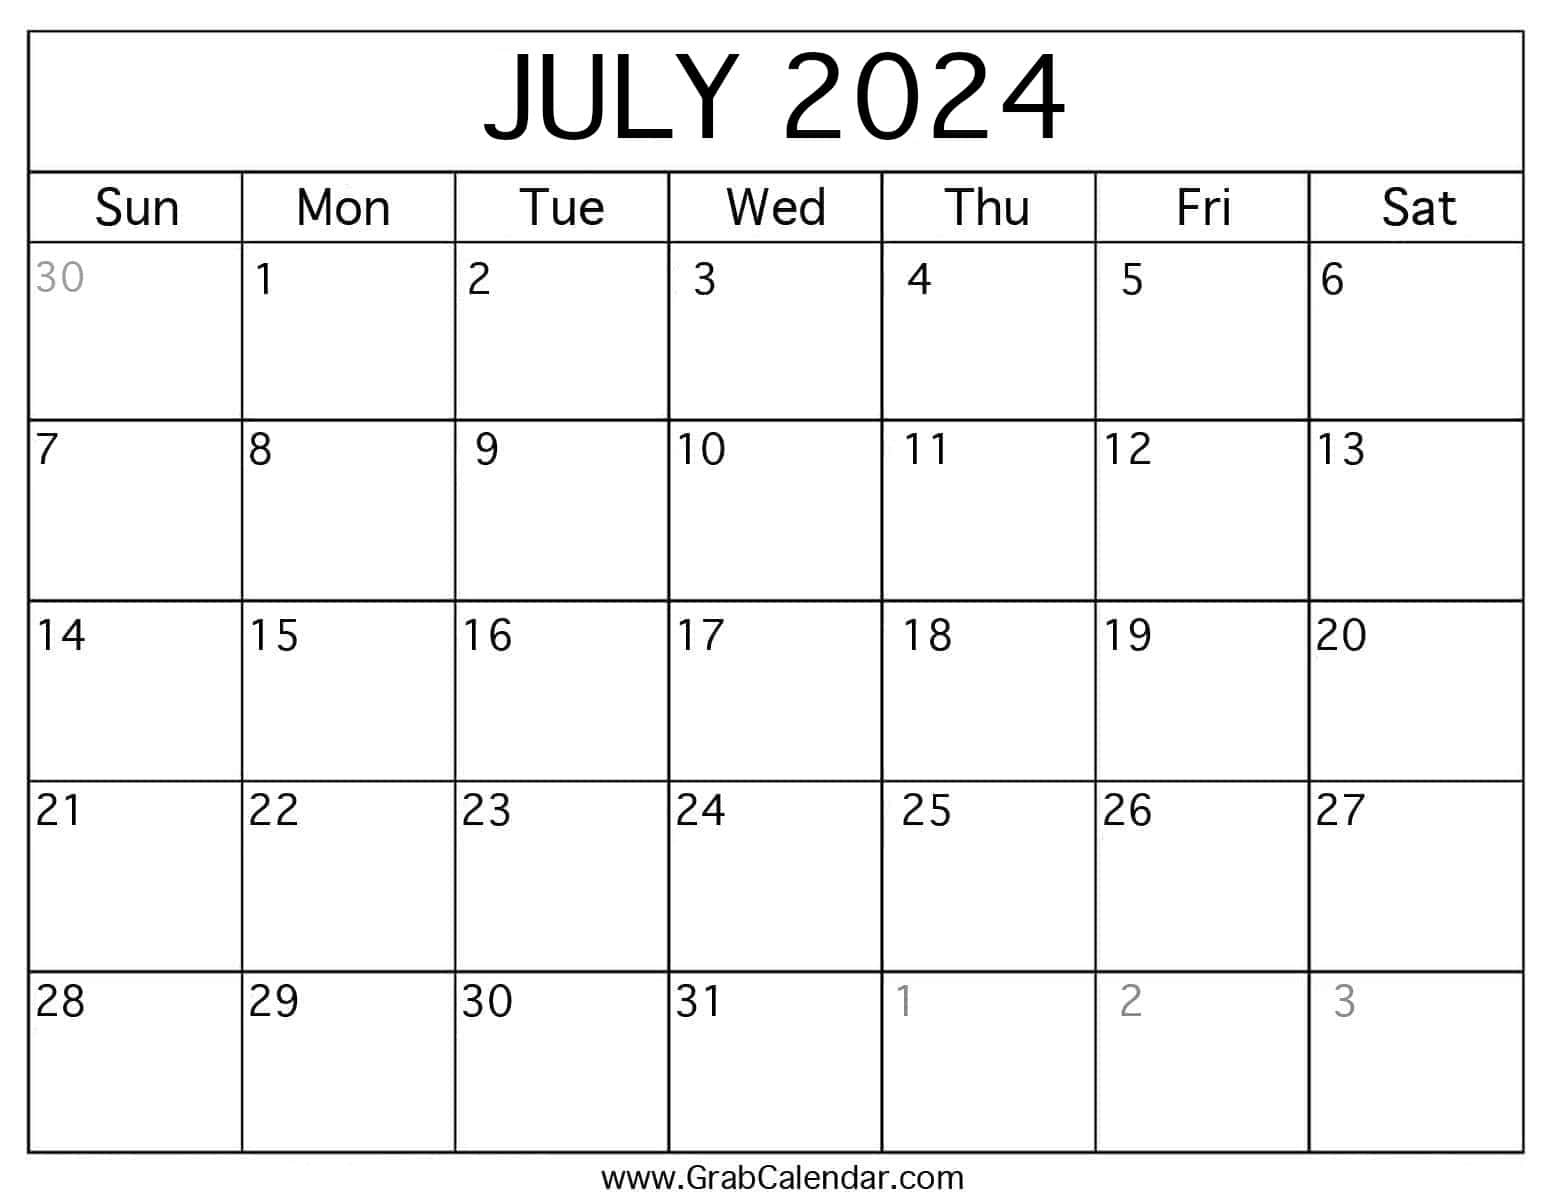 Printable July 2024 Calendar throughout Images of July 2024 Calendar